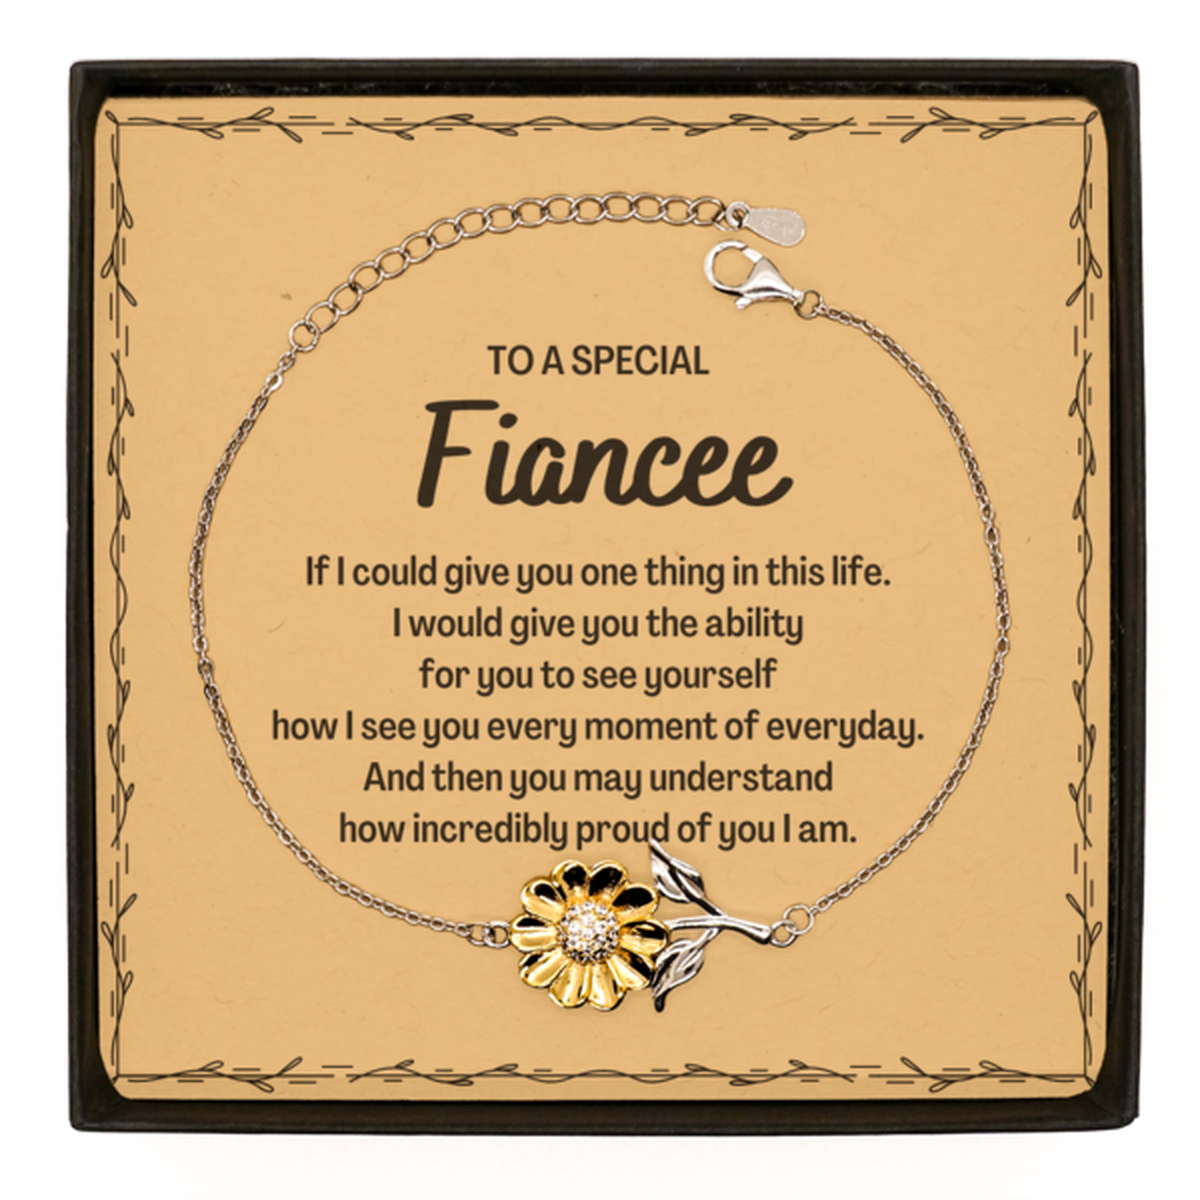 To My Fiancee Sunflower Bracelet, Gifts For Fiancee Message Card, Inspirational Gifts for Christmas Birthday, Epic Gifts for Fiancee To A Special Fiancee how incredibly proud of you I am